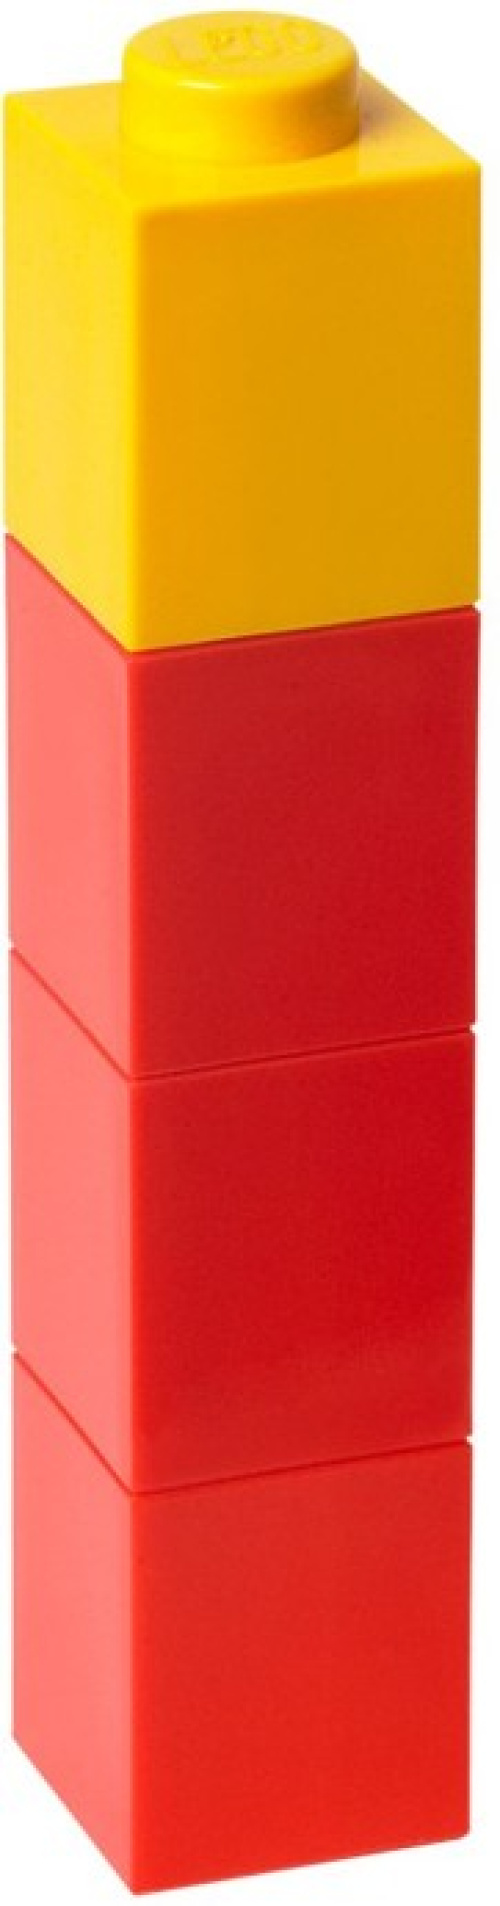 5004897-1 Square Drinking Bottle – Red with Yellow Lid